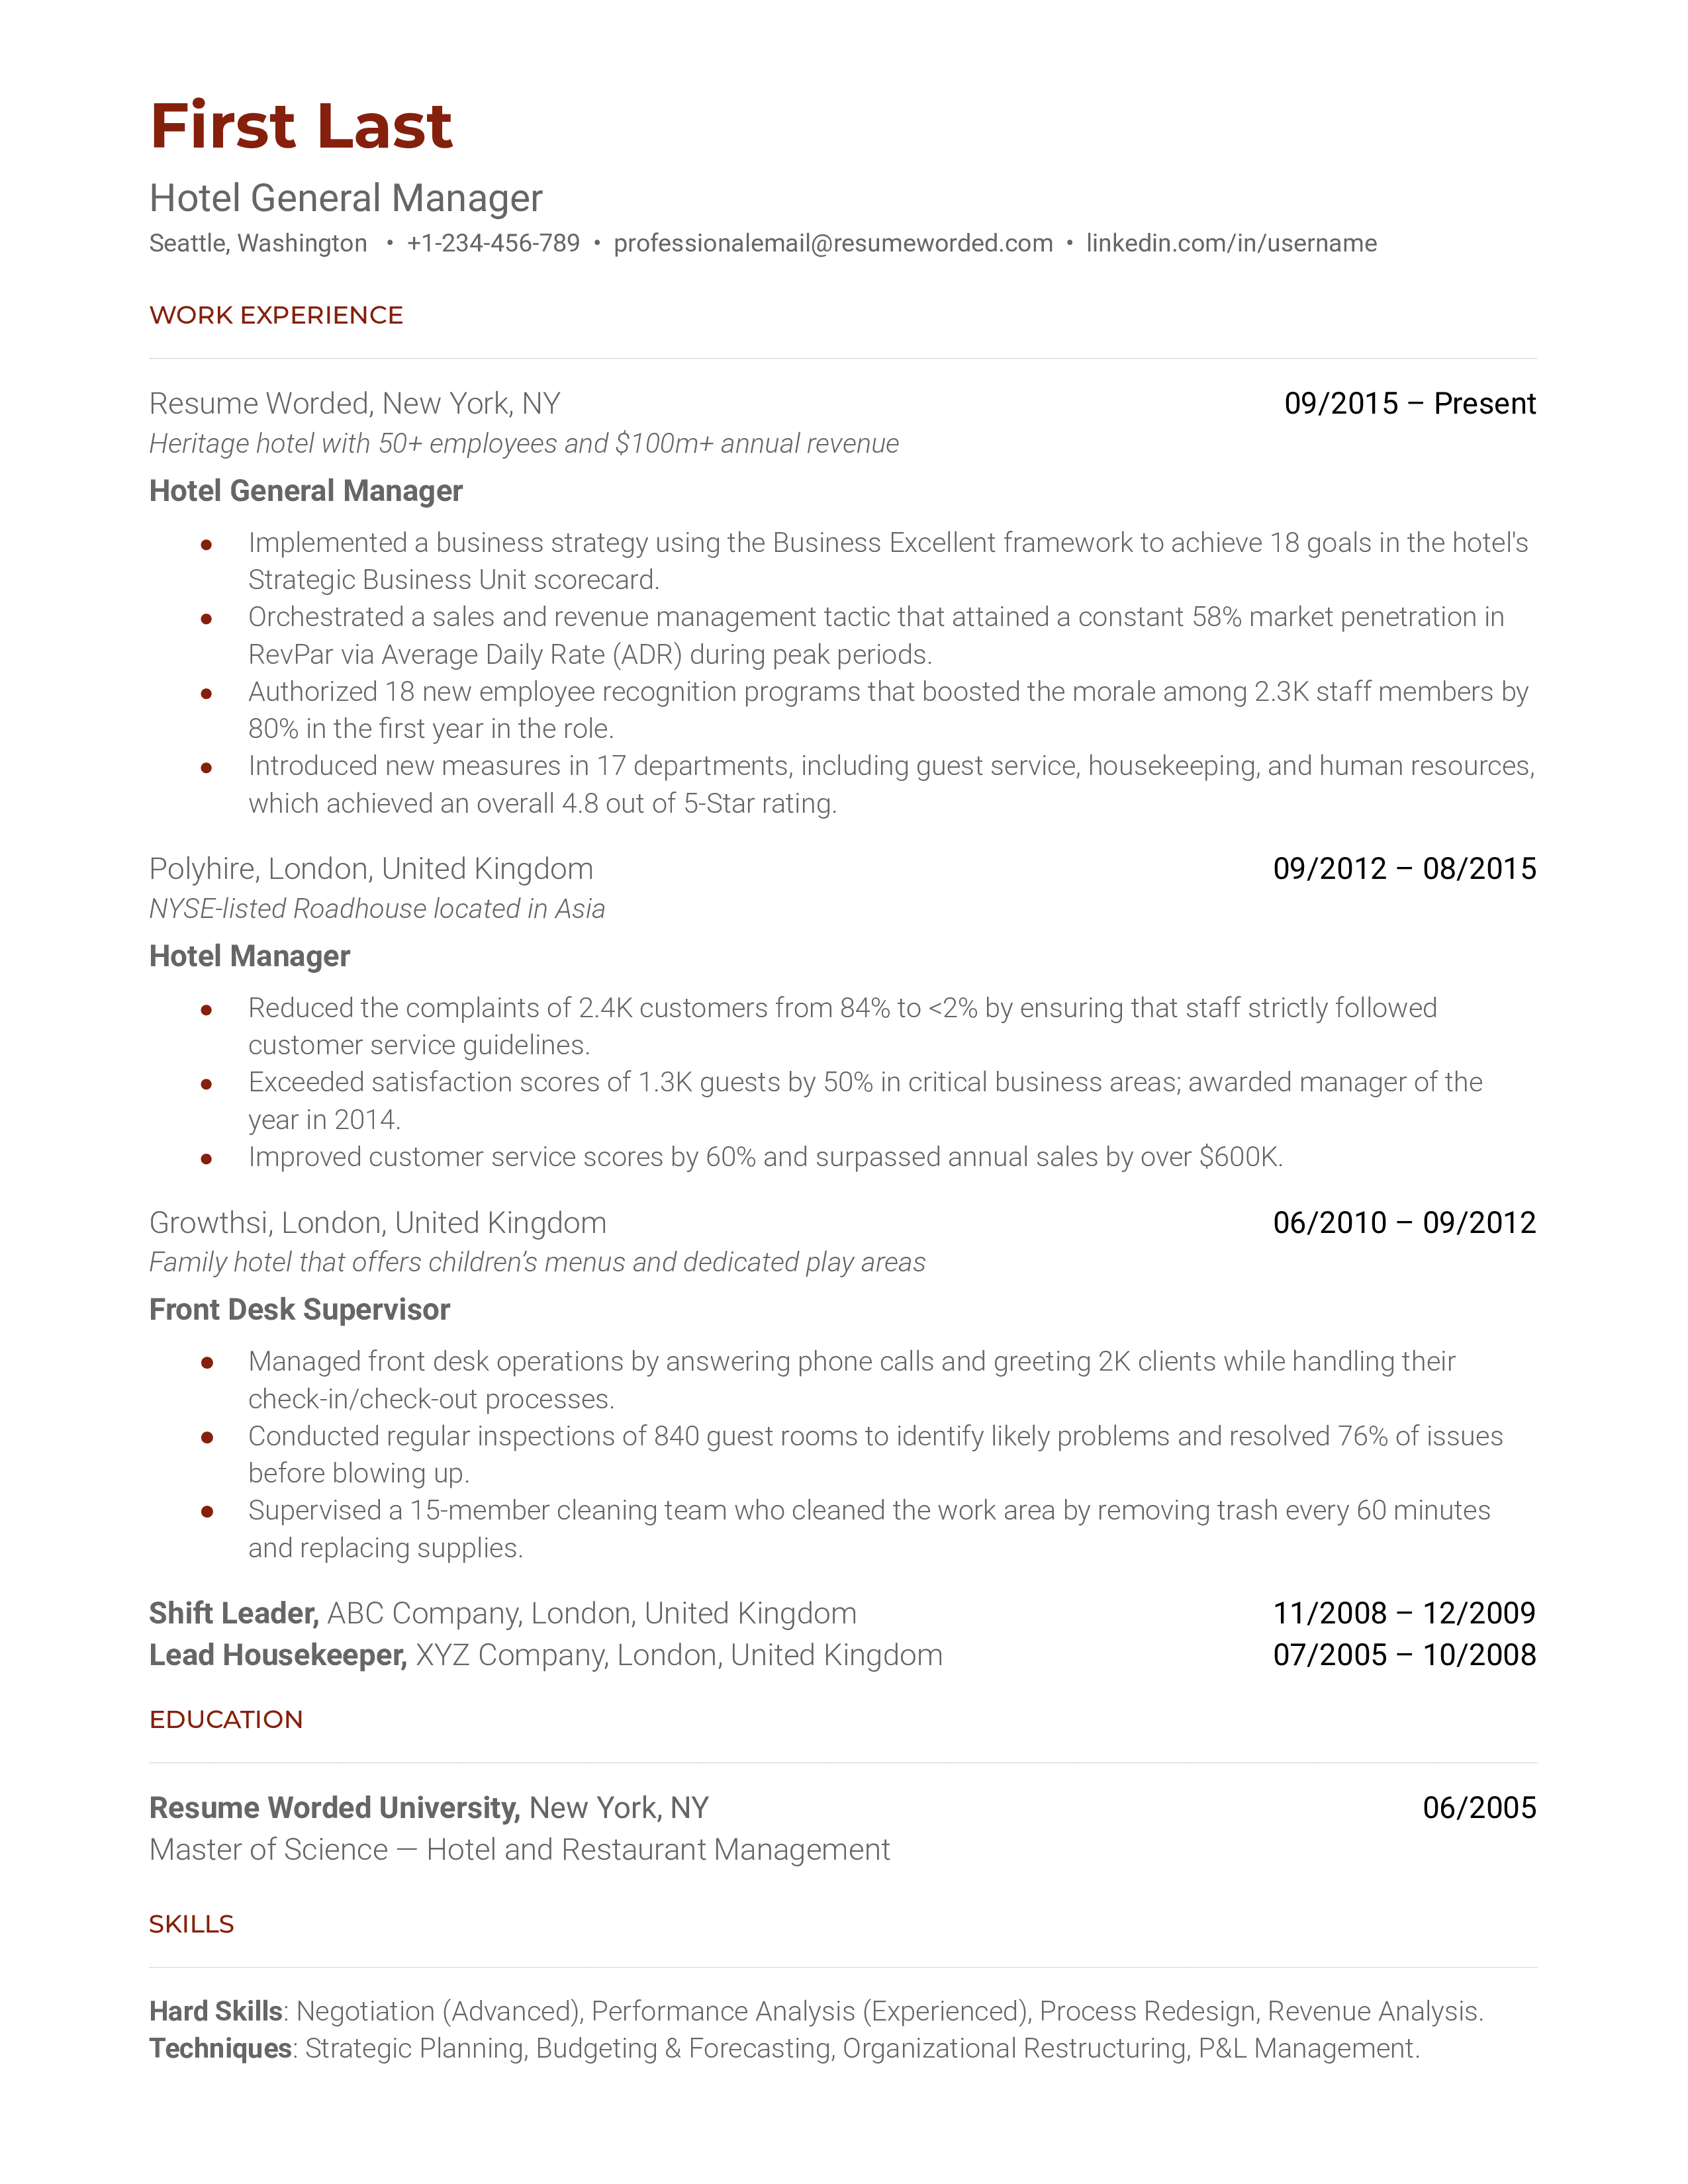 A hotel general manager resume sample that highlights the applicant’s career growth and experience level.